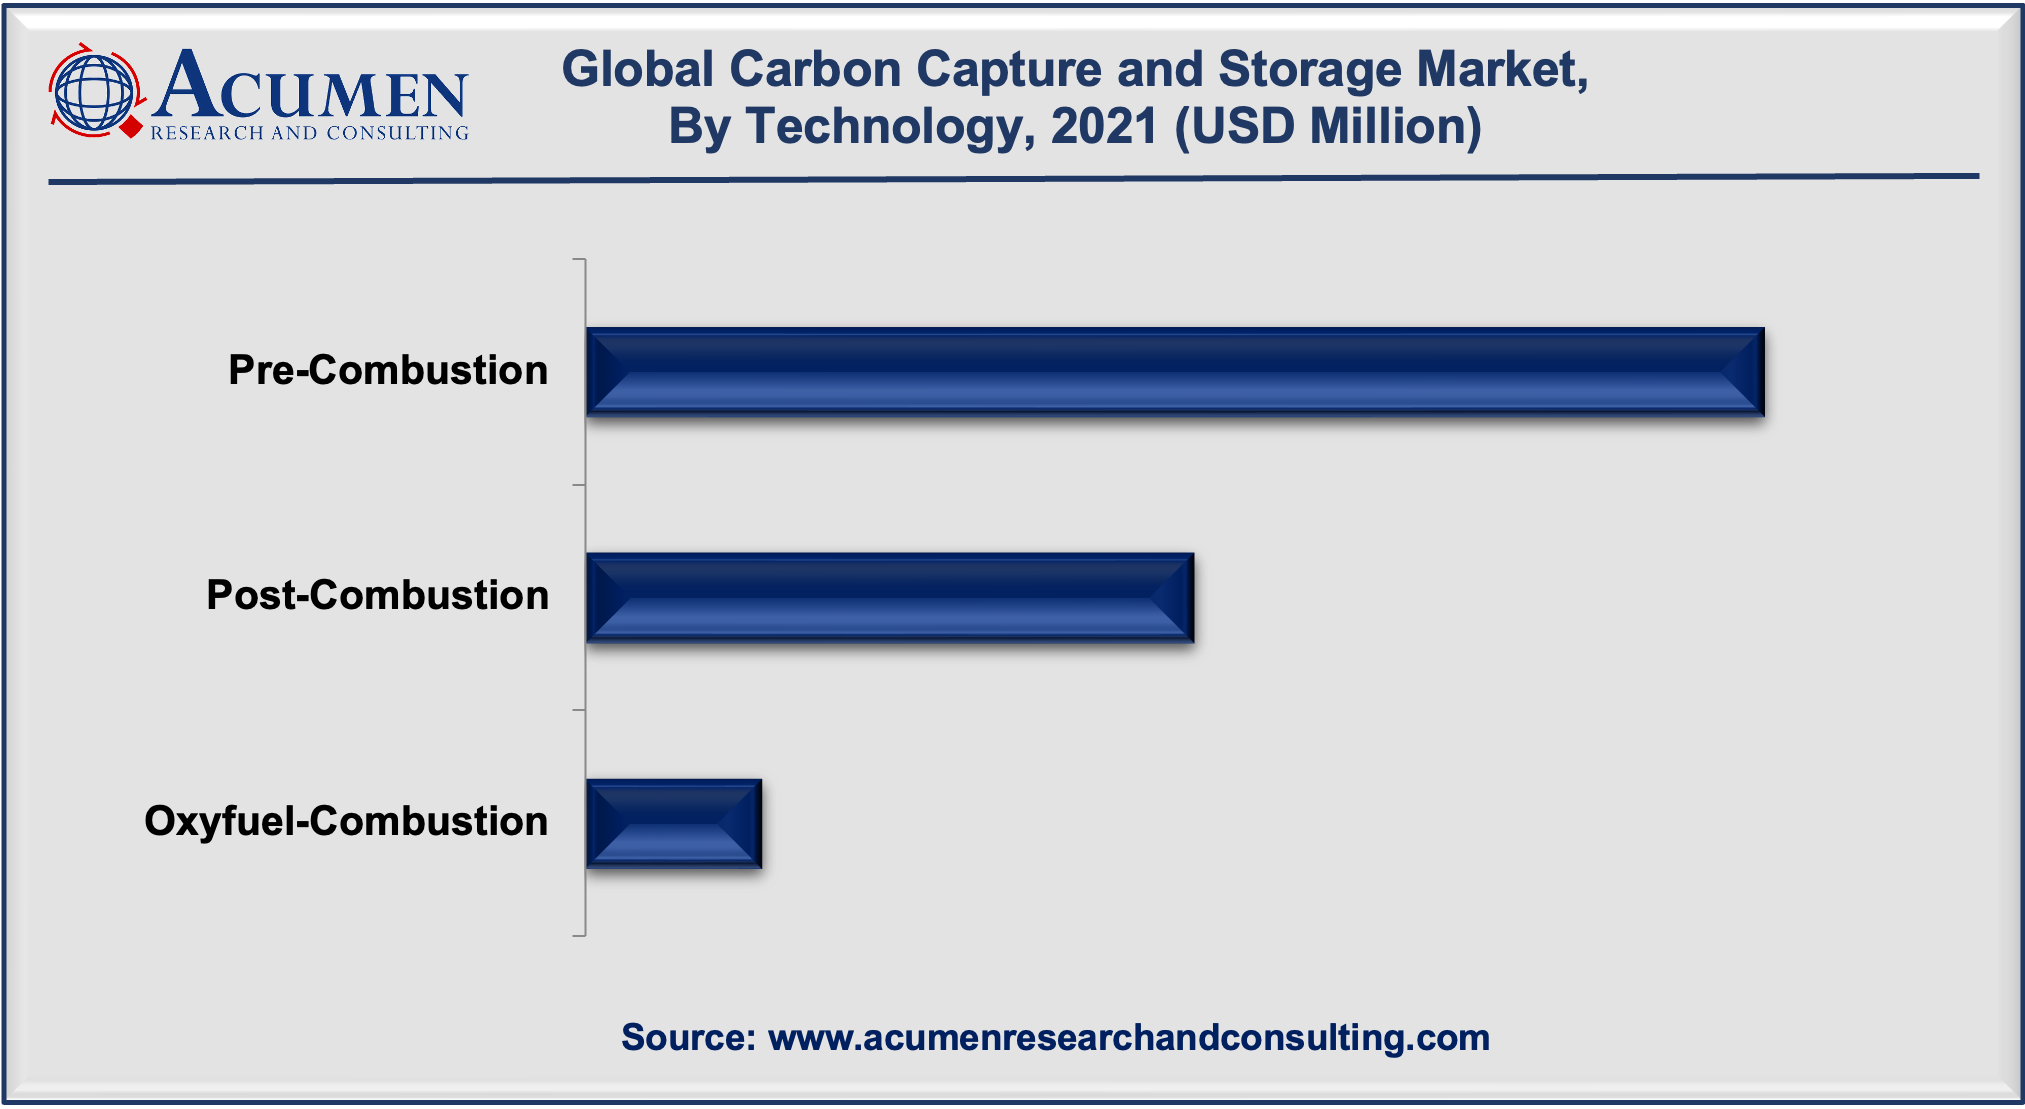 Carbon Capture and Storage Market Size is estimated to reach USD 8,636 by 2030, with a significant CAGR of 13.7%